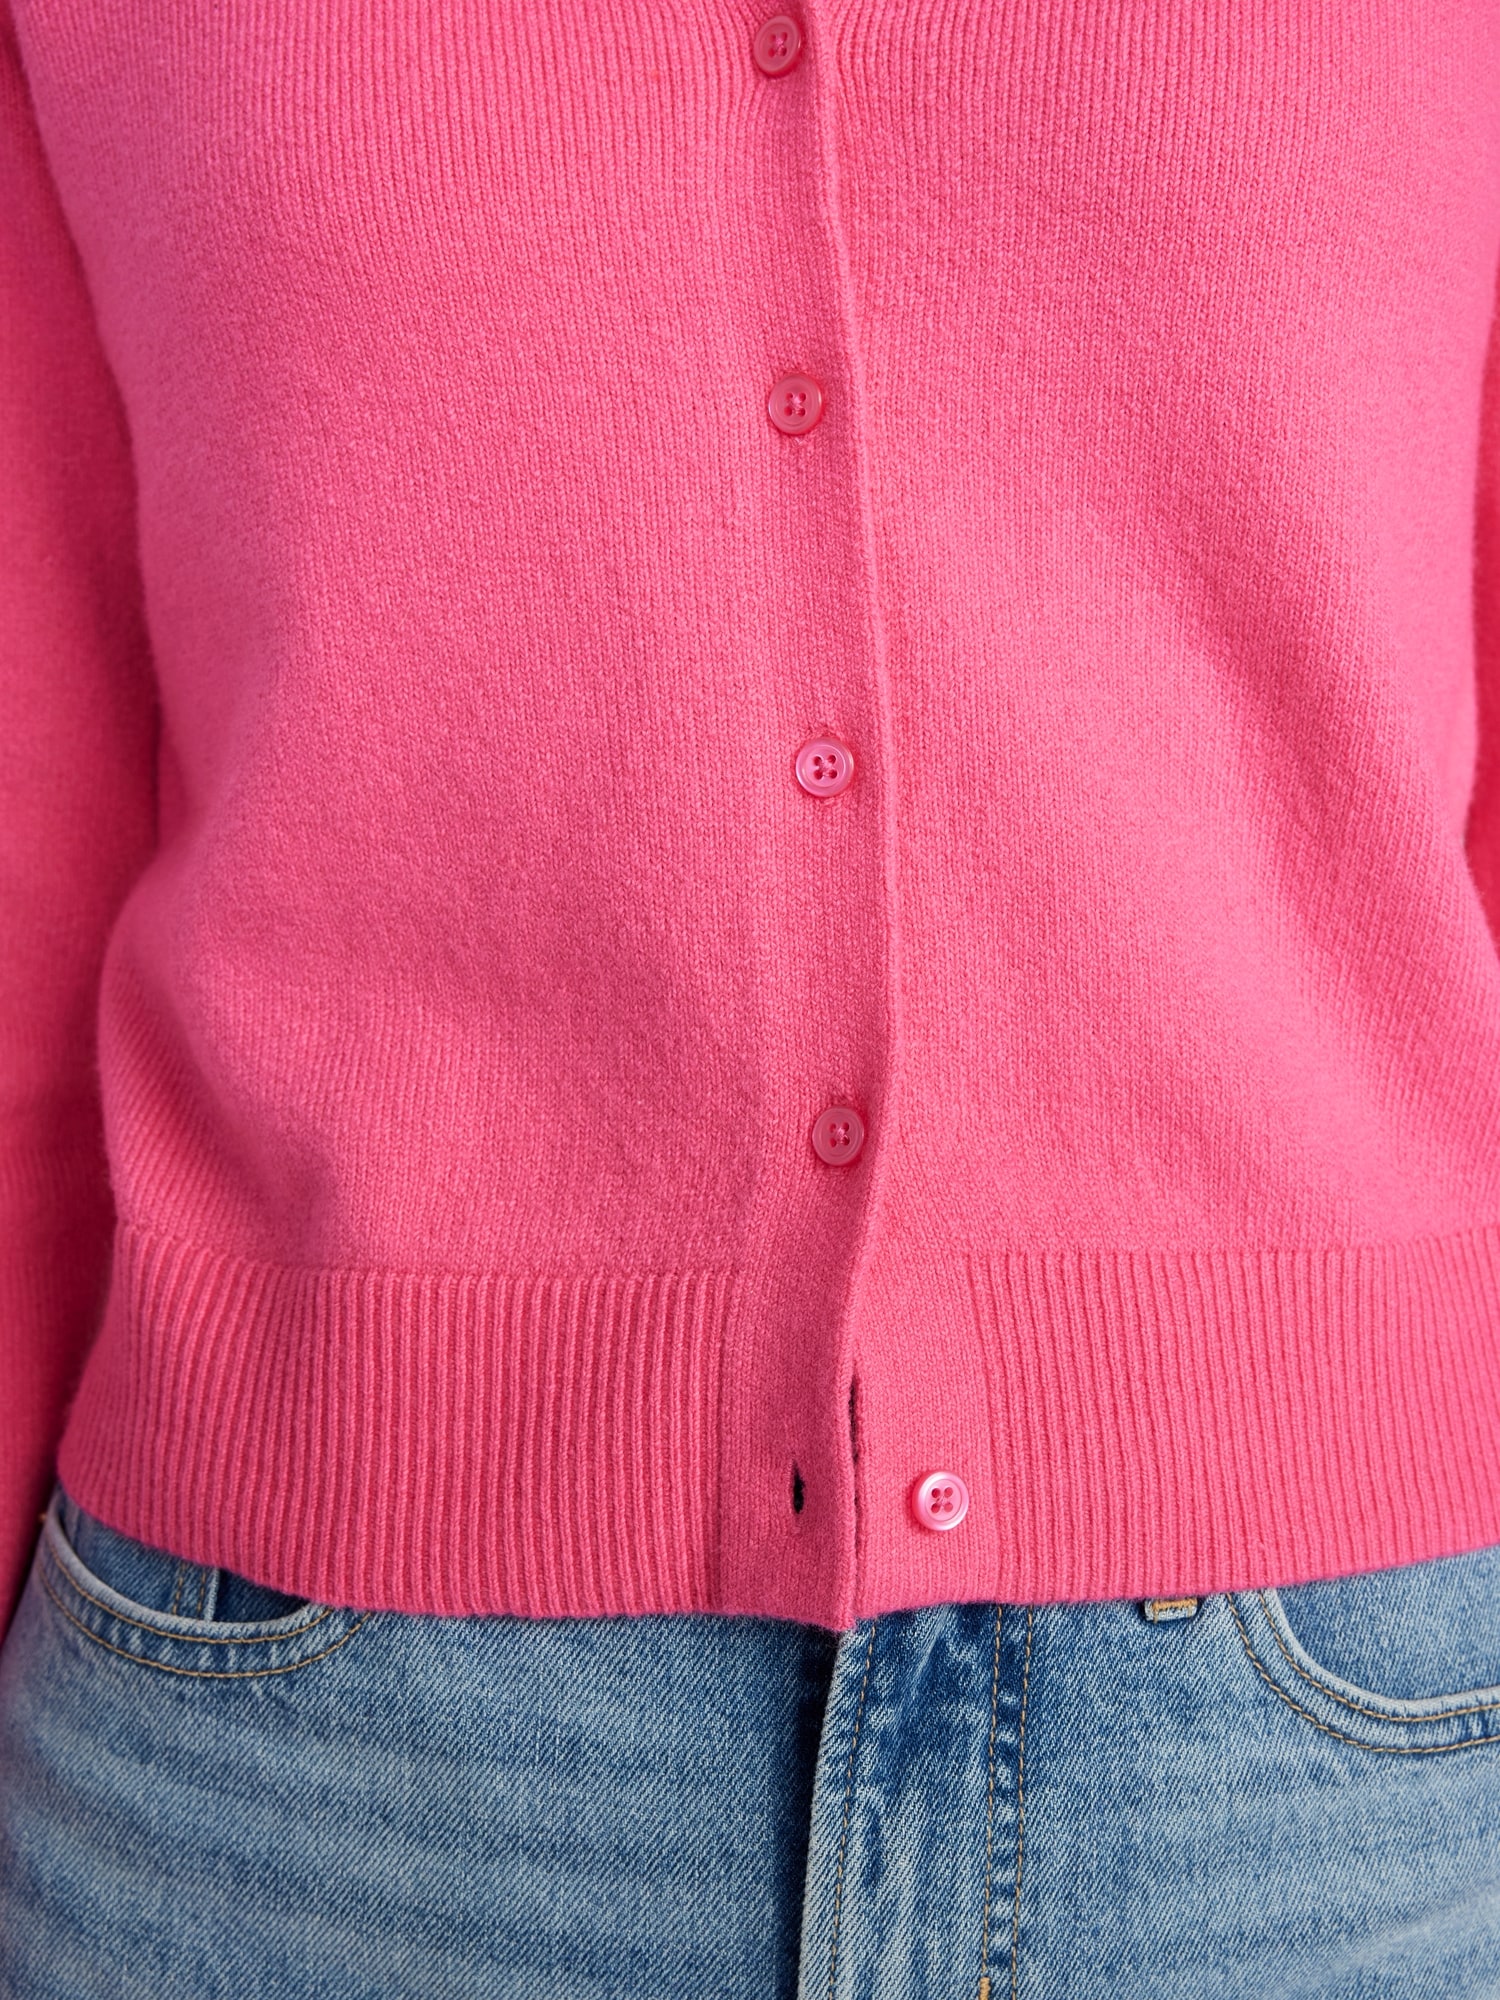 Warming Up to You Hot Pink Knit Cropped Cardigan Sweater